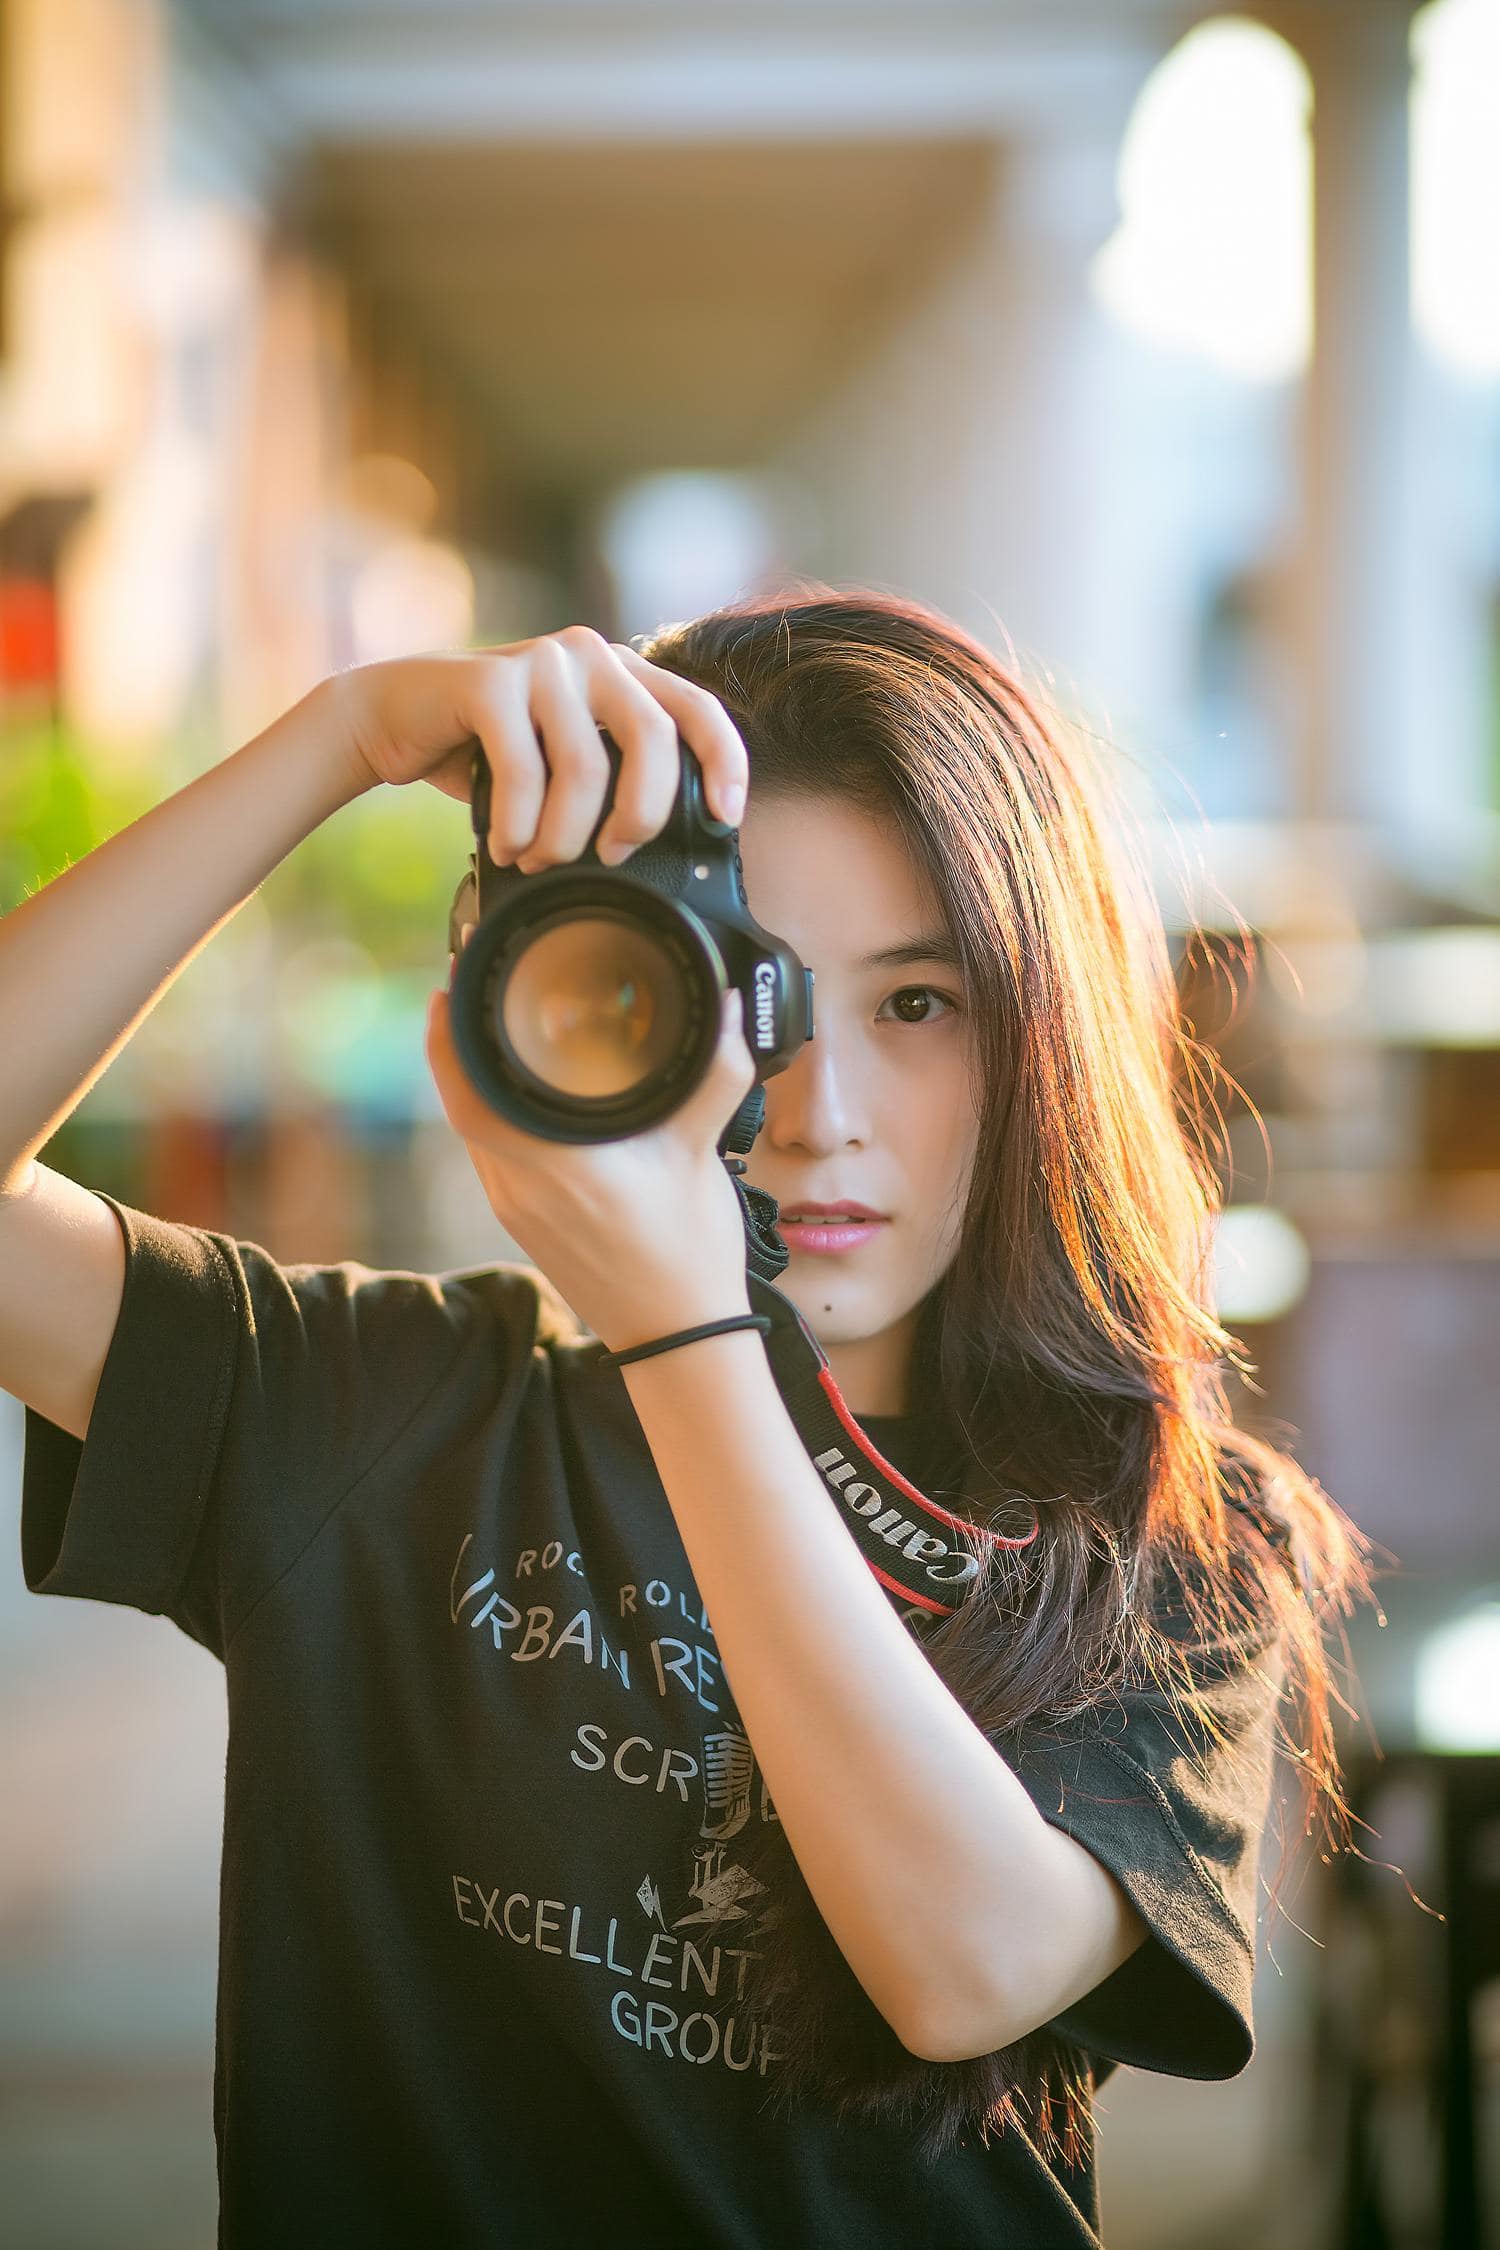 DO YOU KNOW WHAT YOUR DOMINANT EYE IS AND HOW IT INFLUENCES YOUR WAY OF TAKING PICTURES? FIND OUT